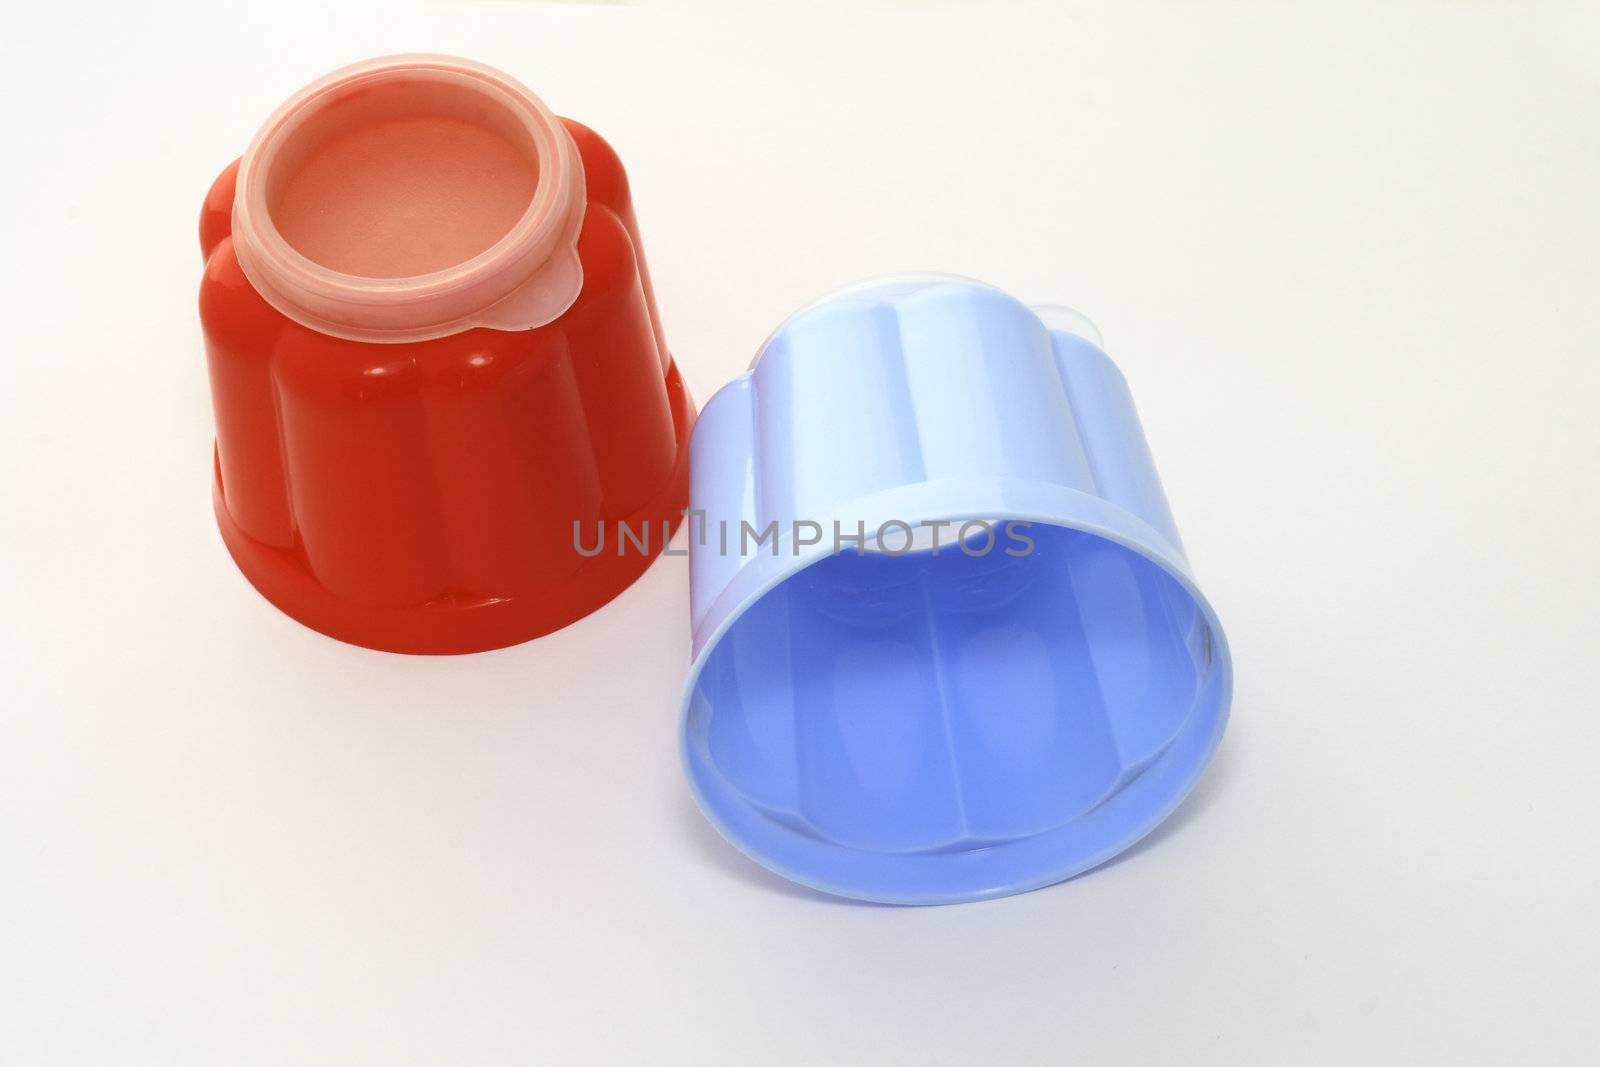 jelly moulds by leafy